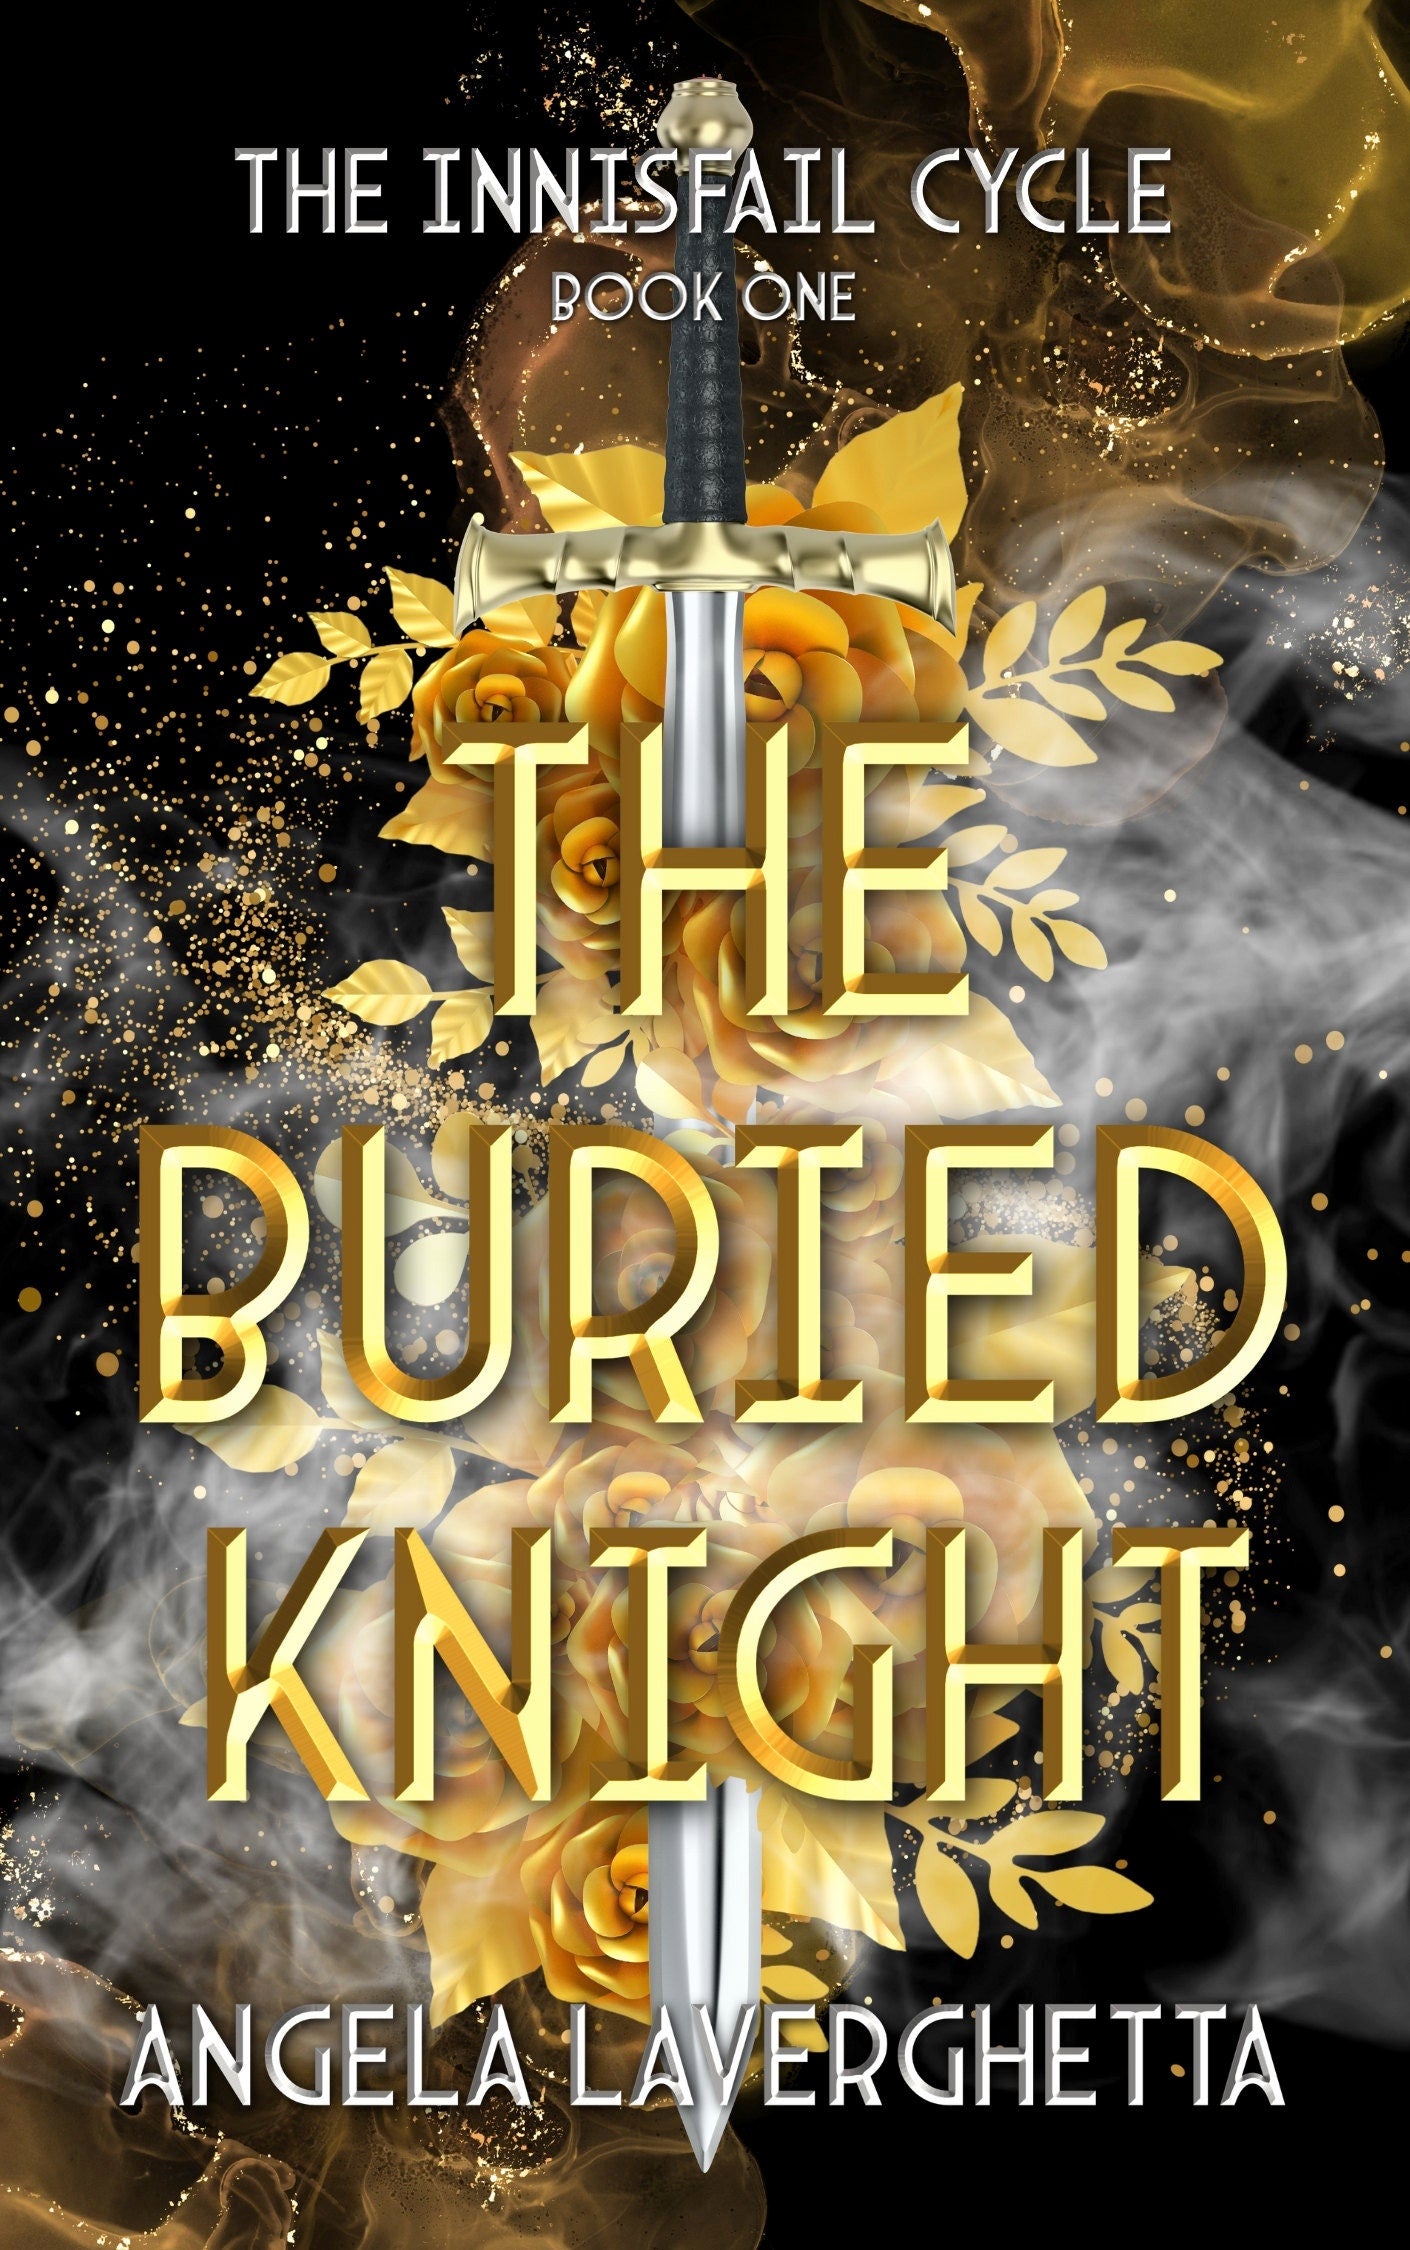 The Buried Knight Signed Hardcover